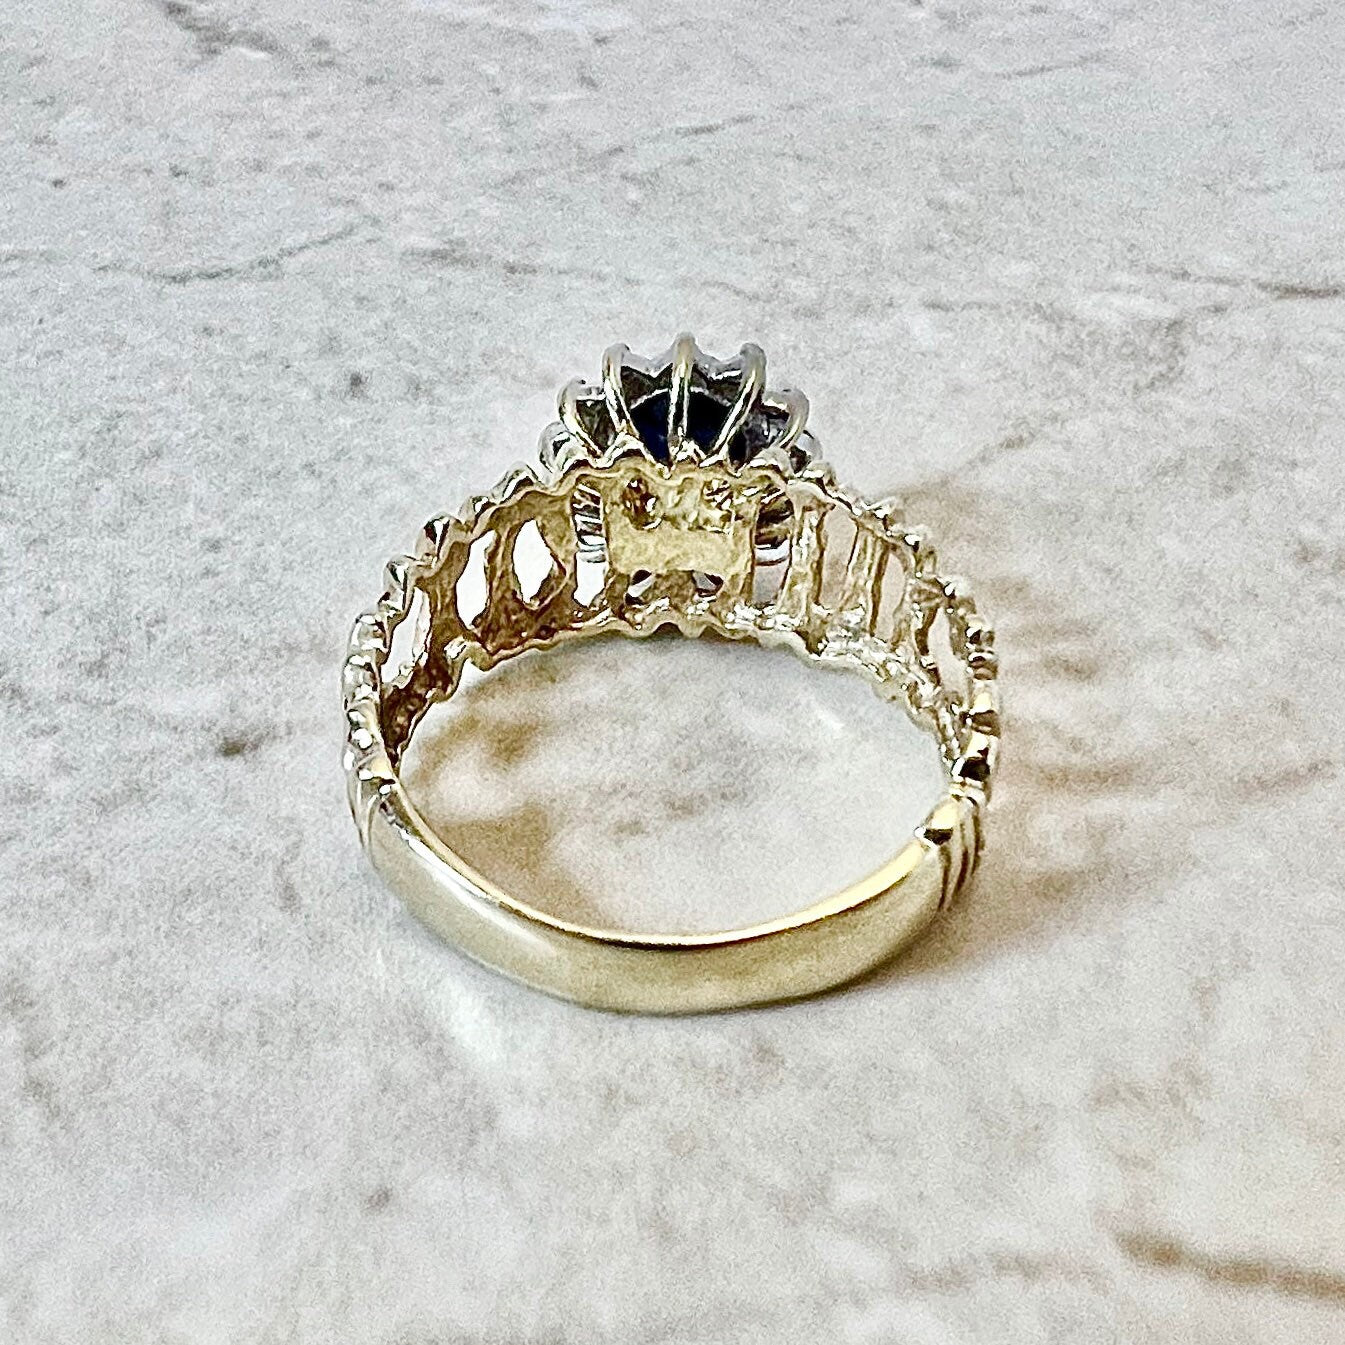 Vintage 14K Natural Sapphire & Diamond Cocktail Ring - Yellow And White Gold- April September Birthstone - Birthday Gift